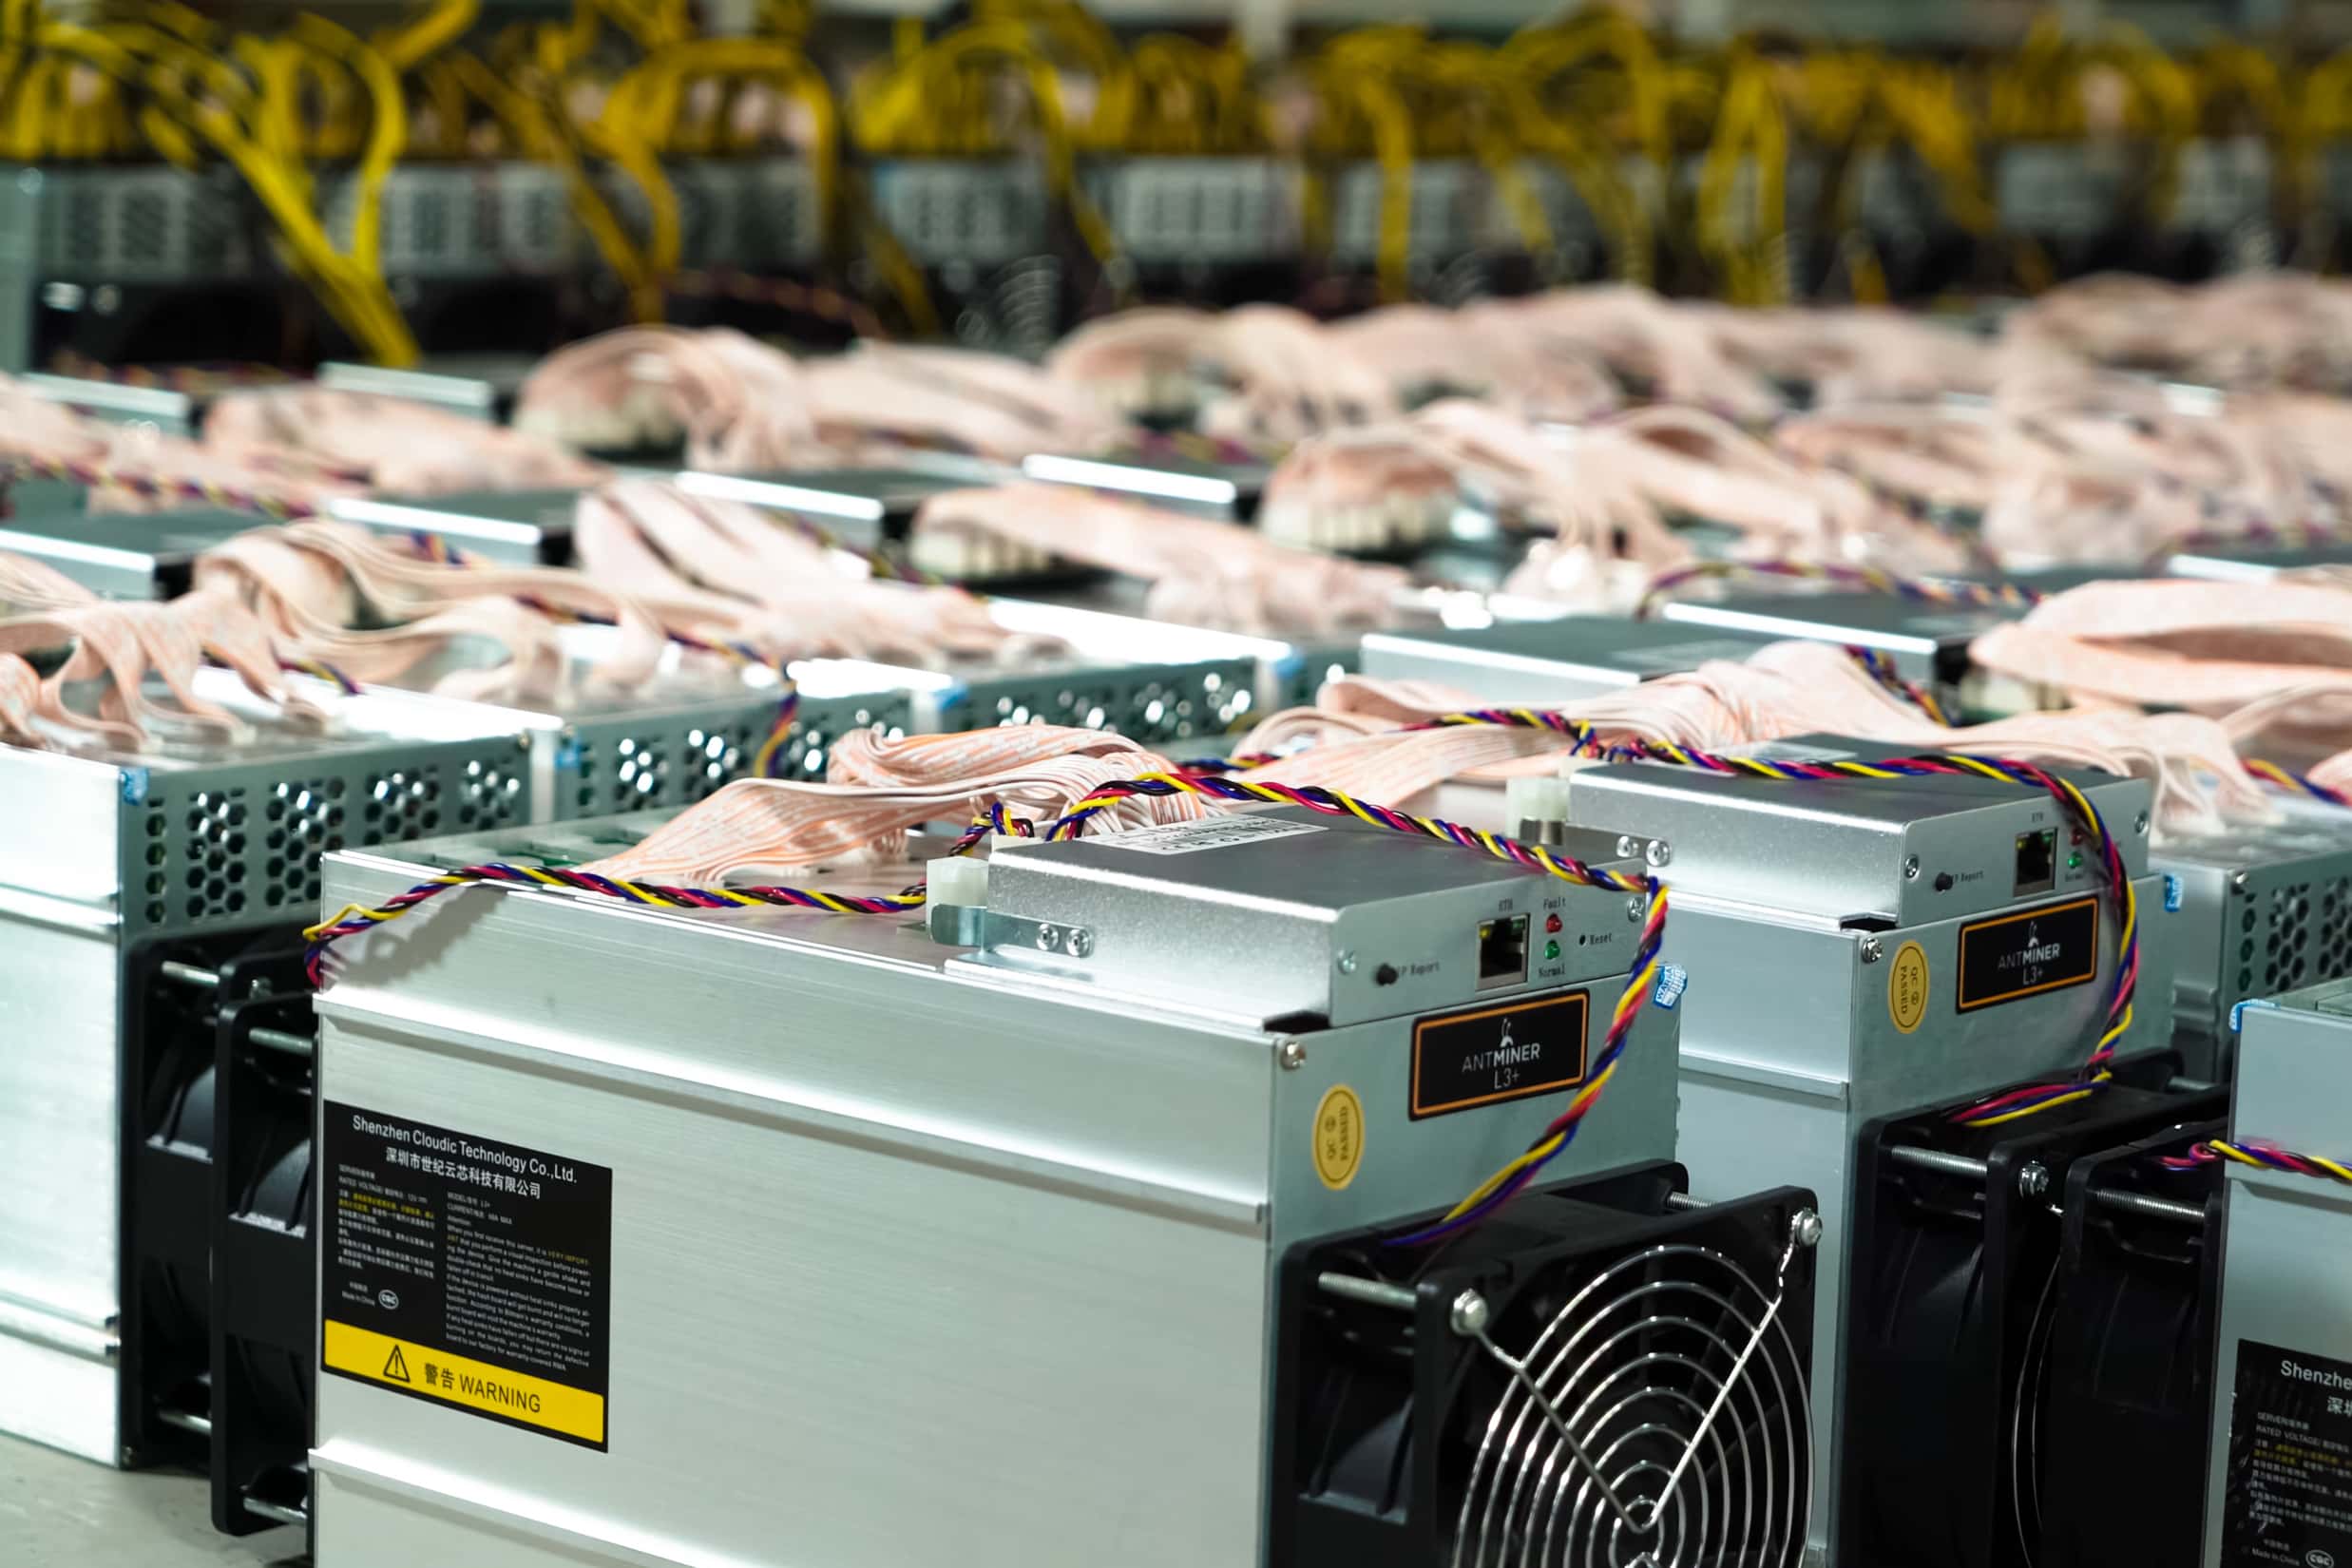 BTC miners don’t have it easy – overview